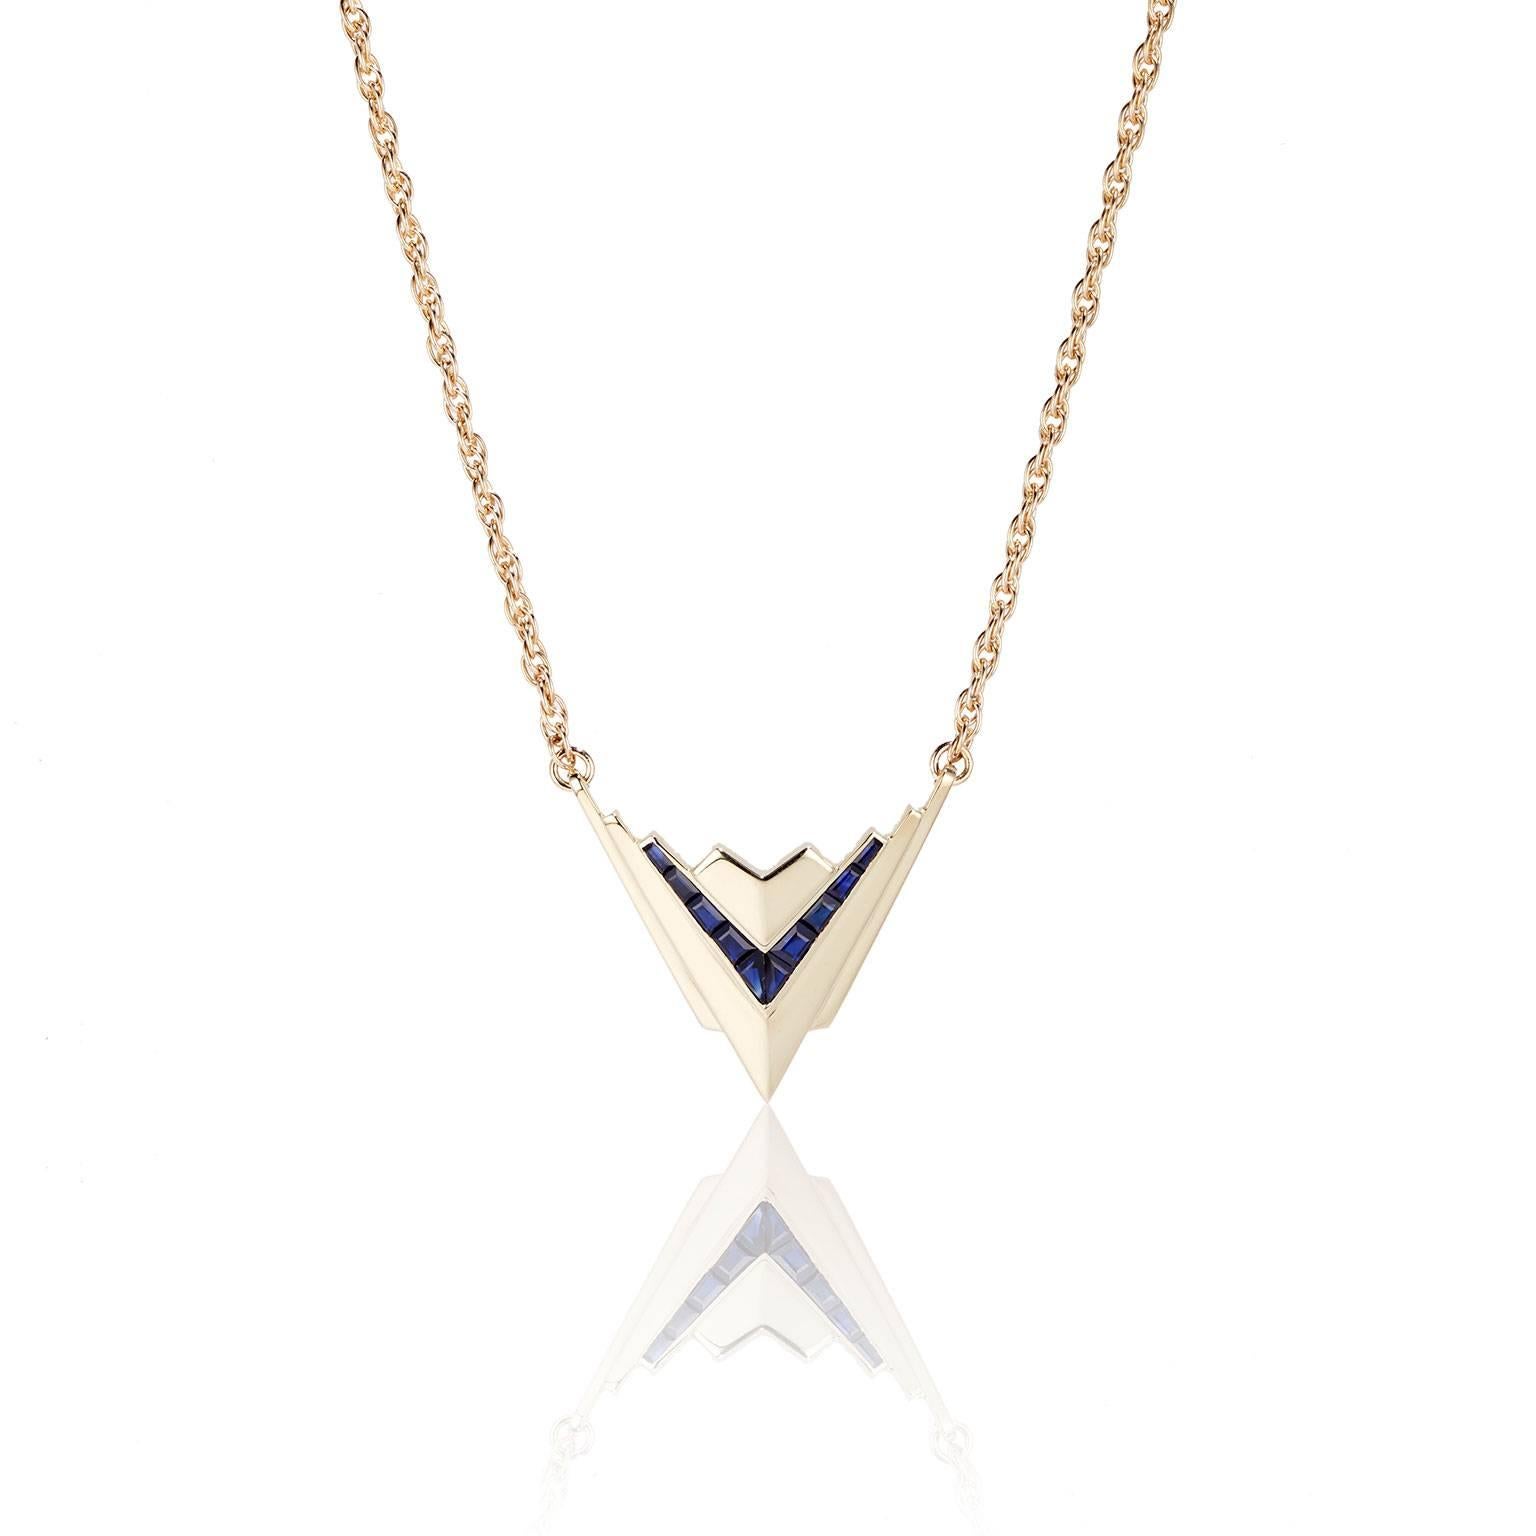 The Metropolis pendant combines blue/black sapphires with 18-karat gold to create a glamorous yet subtle necklace that sits at matinee length beneath the collarbone. Handcrafted in Melbourne, Australia. 

Italian made 18 karat gold chain,